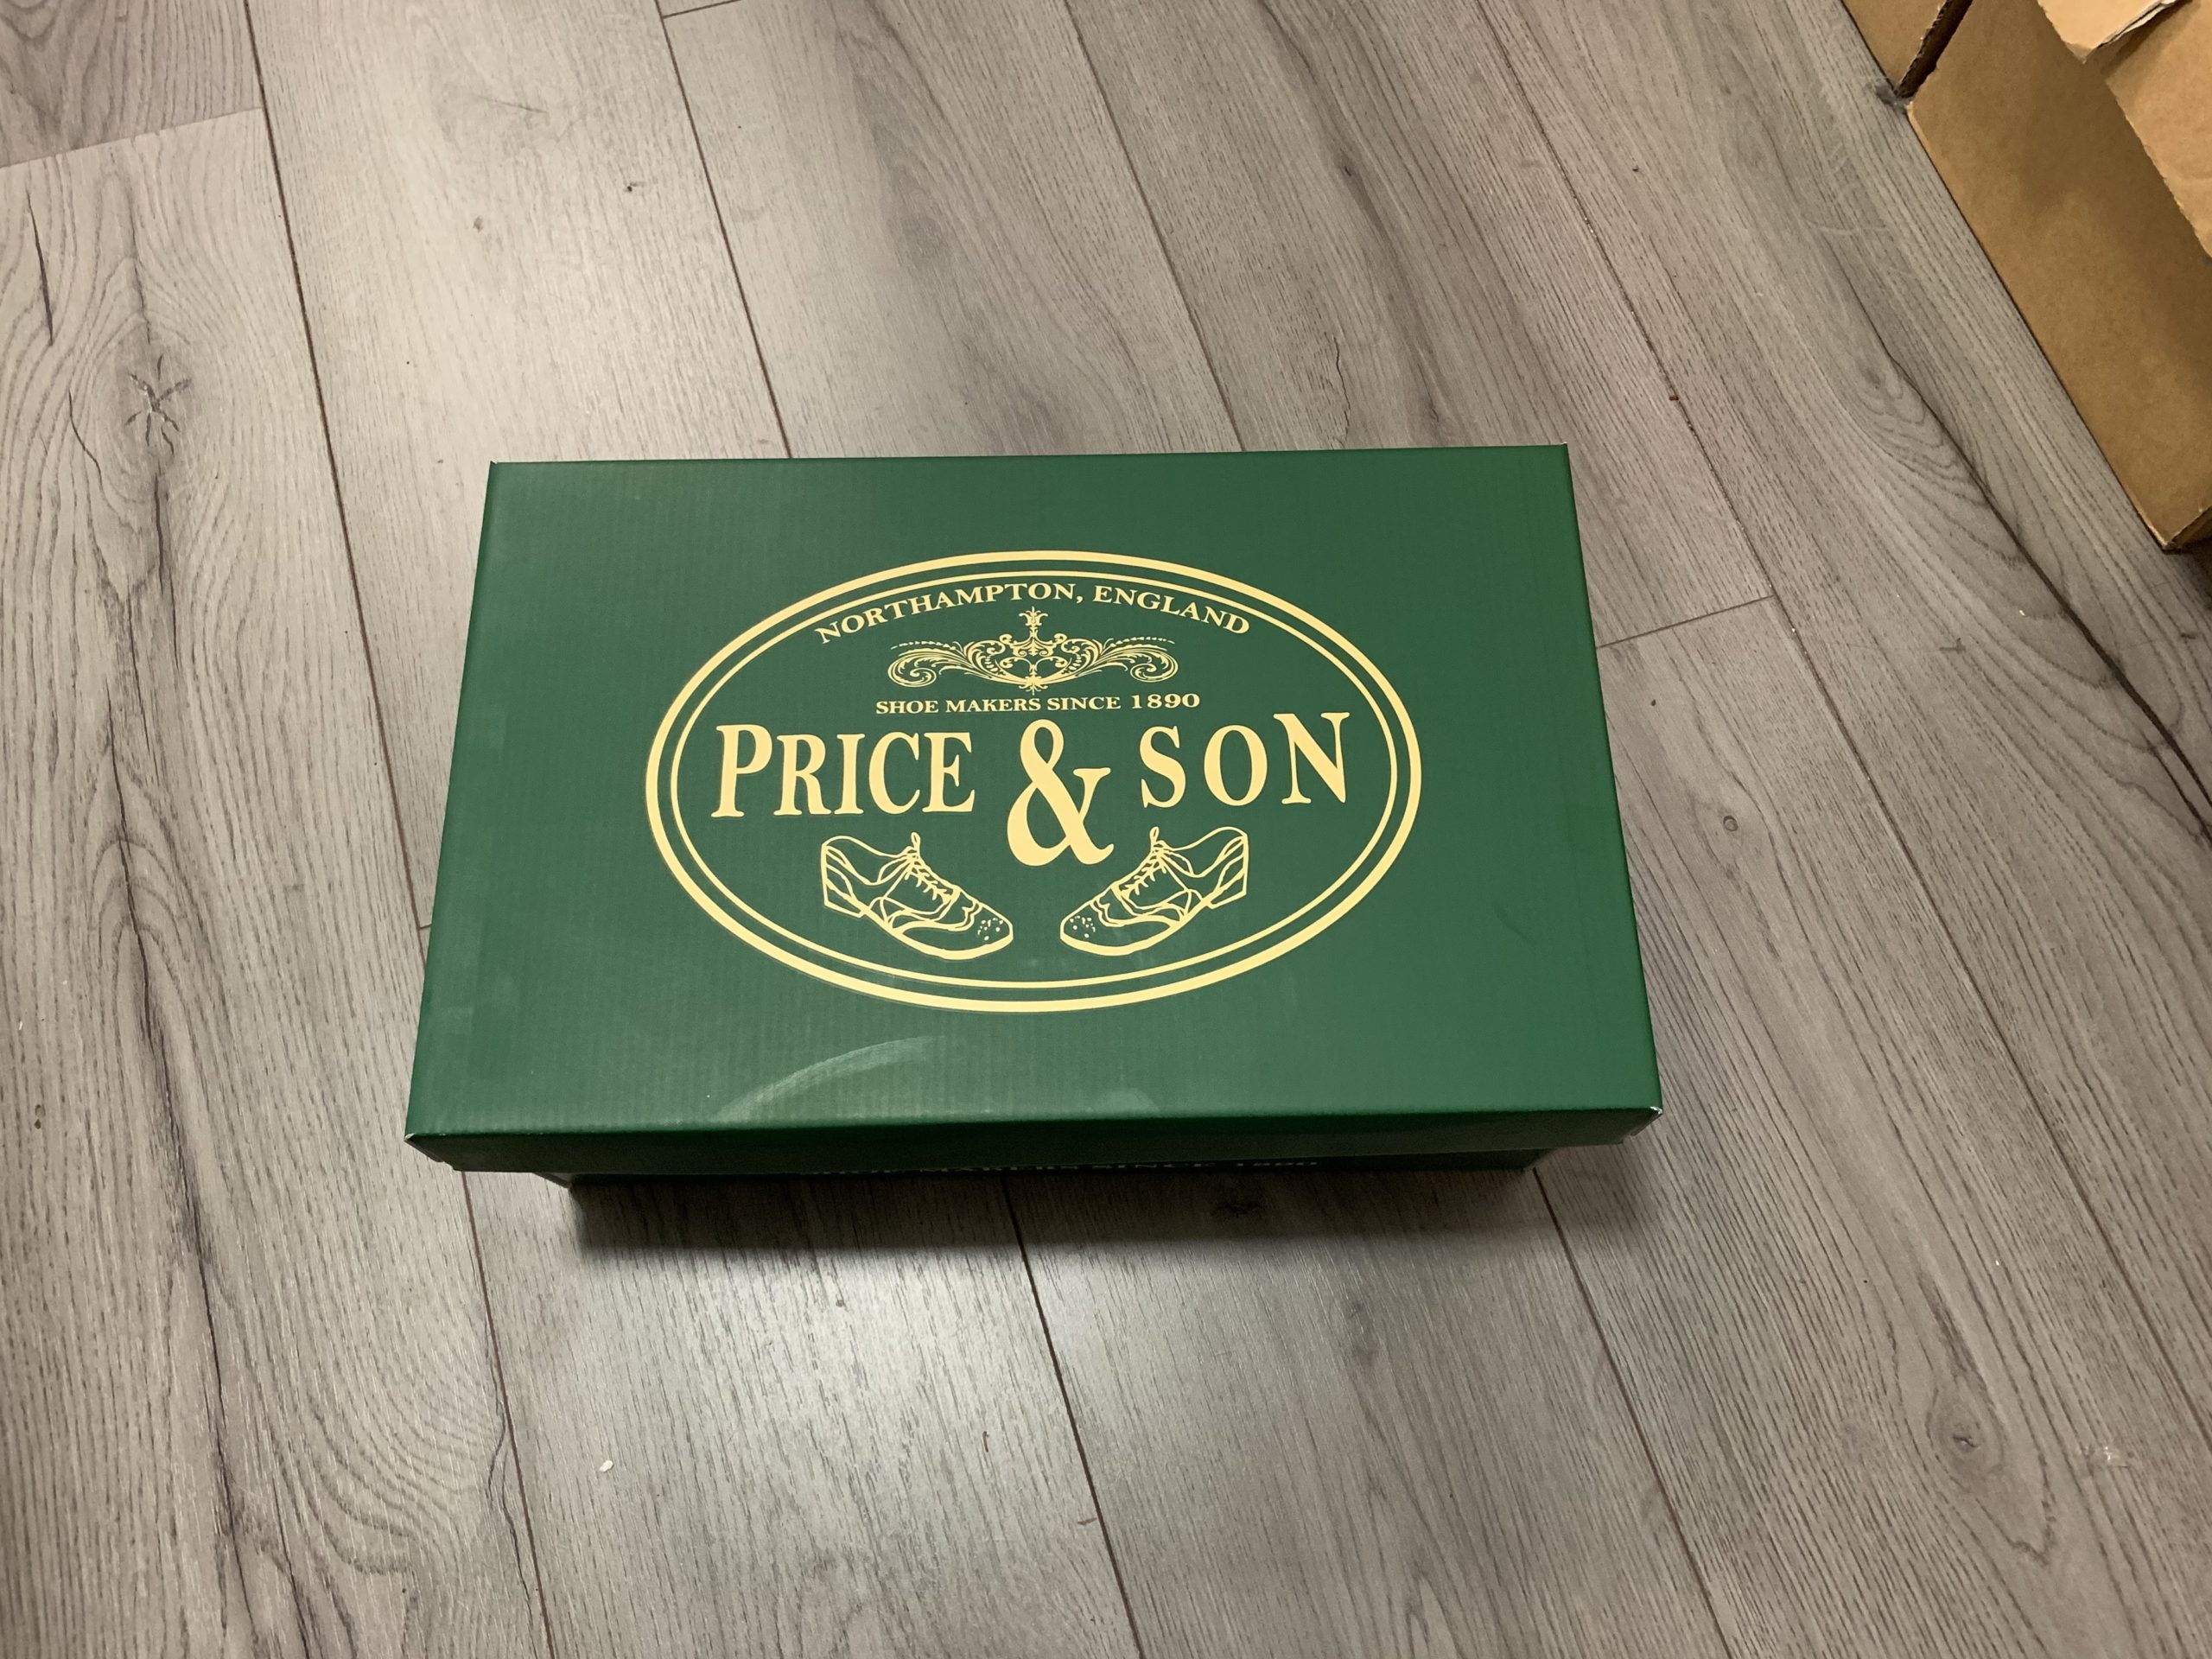 Enter our competition for a chance to win a Kinky Boots Price and Son Shoe Box